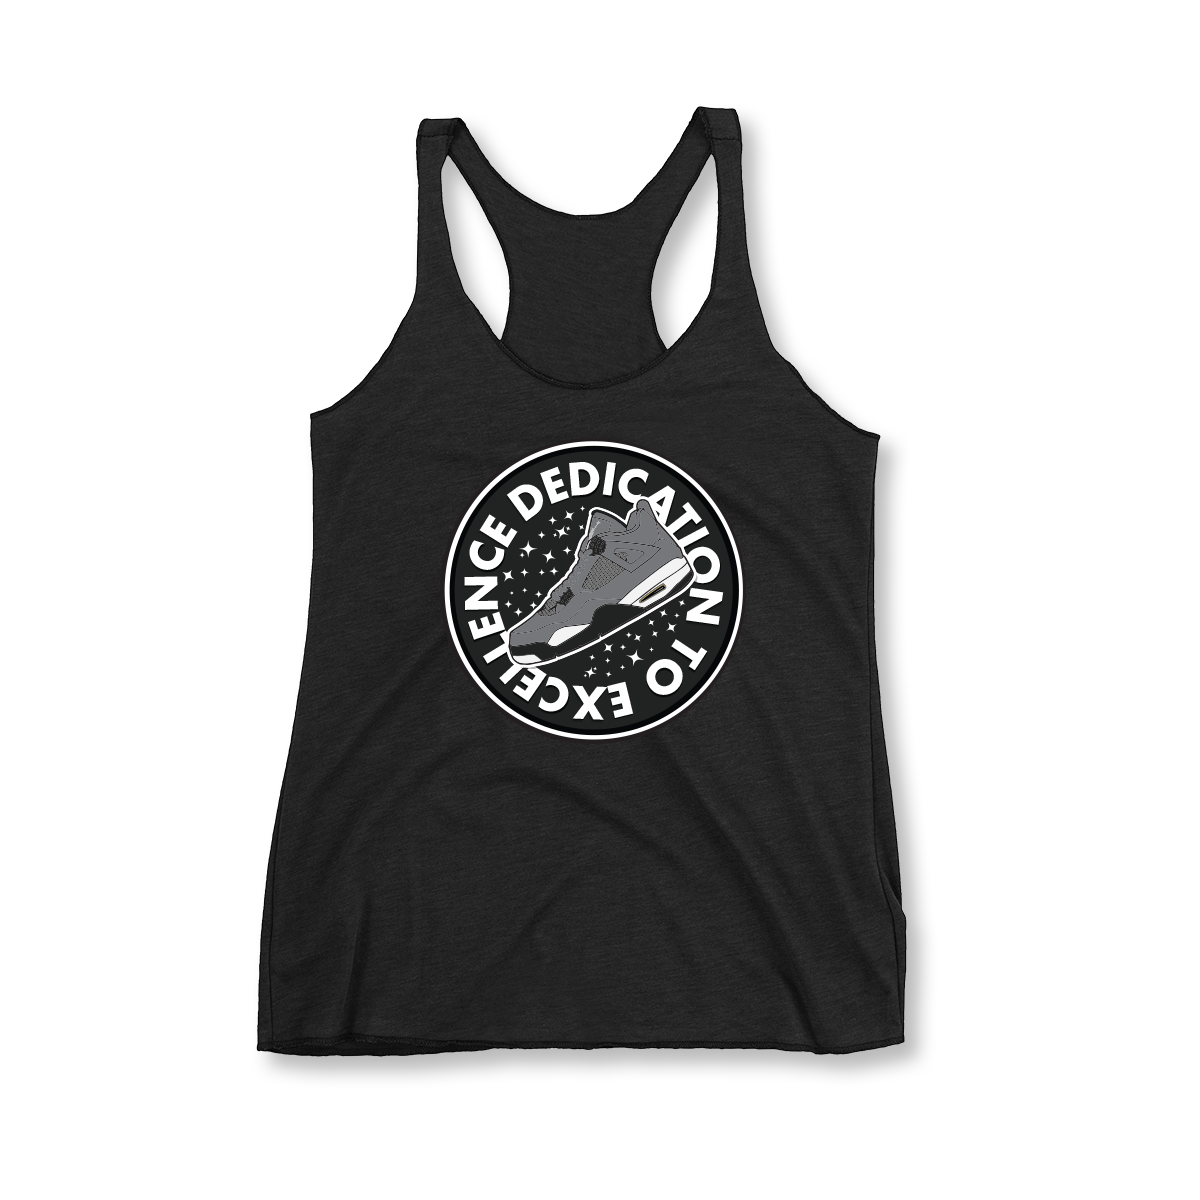 'Dedication To Excellence' in Cool Grey CW Women's Racerback Tank